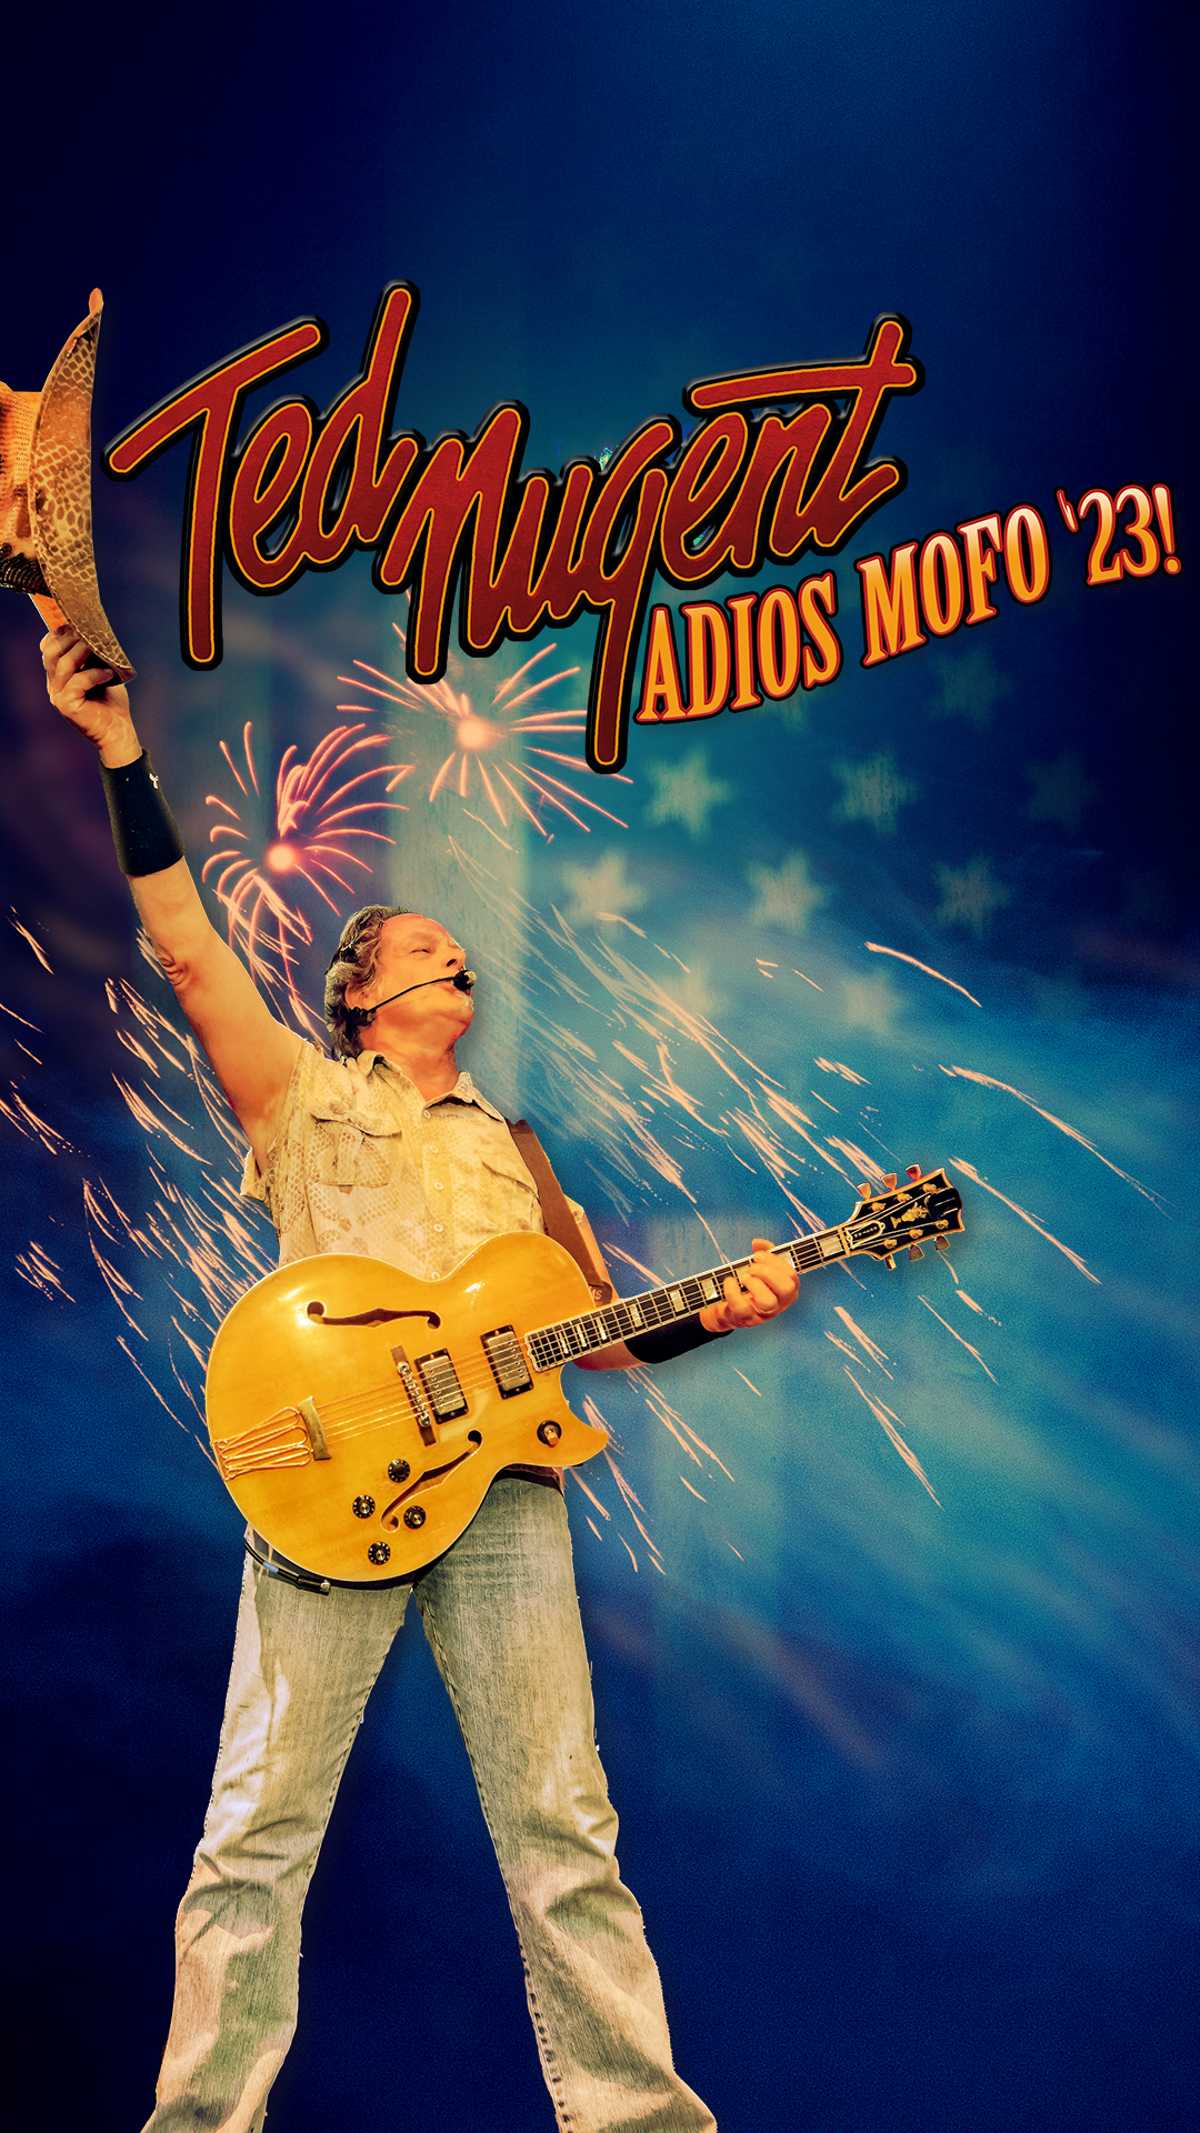 **LOW TICKET WARNING!** Ted Nugent Adios Mofo '23 THE FINAL TOUR